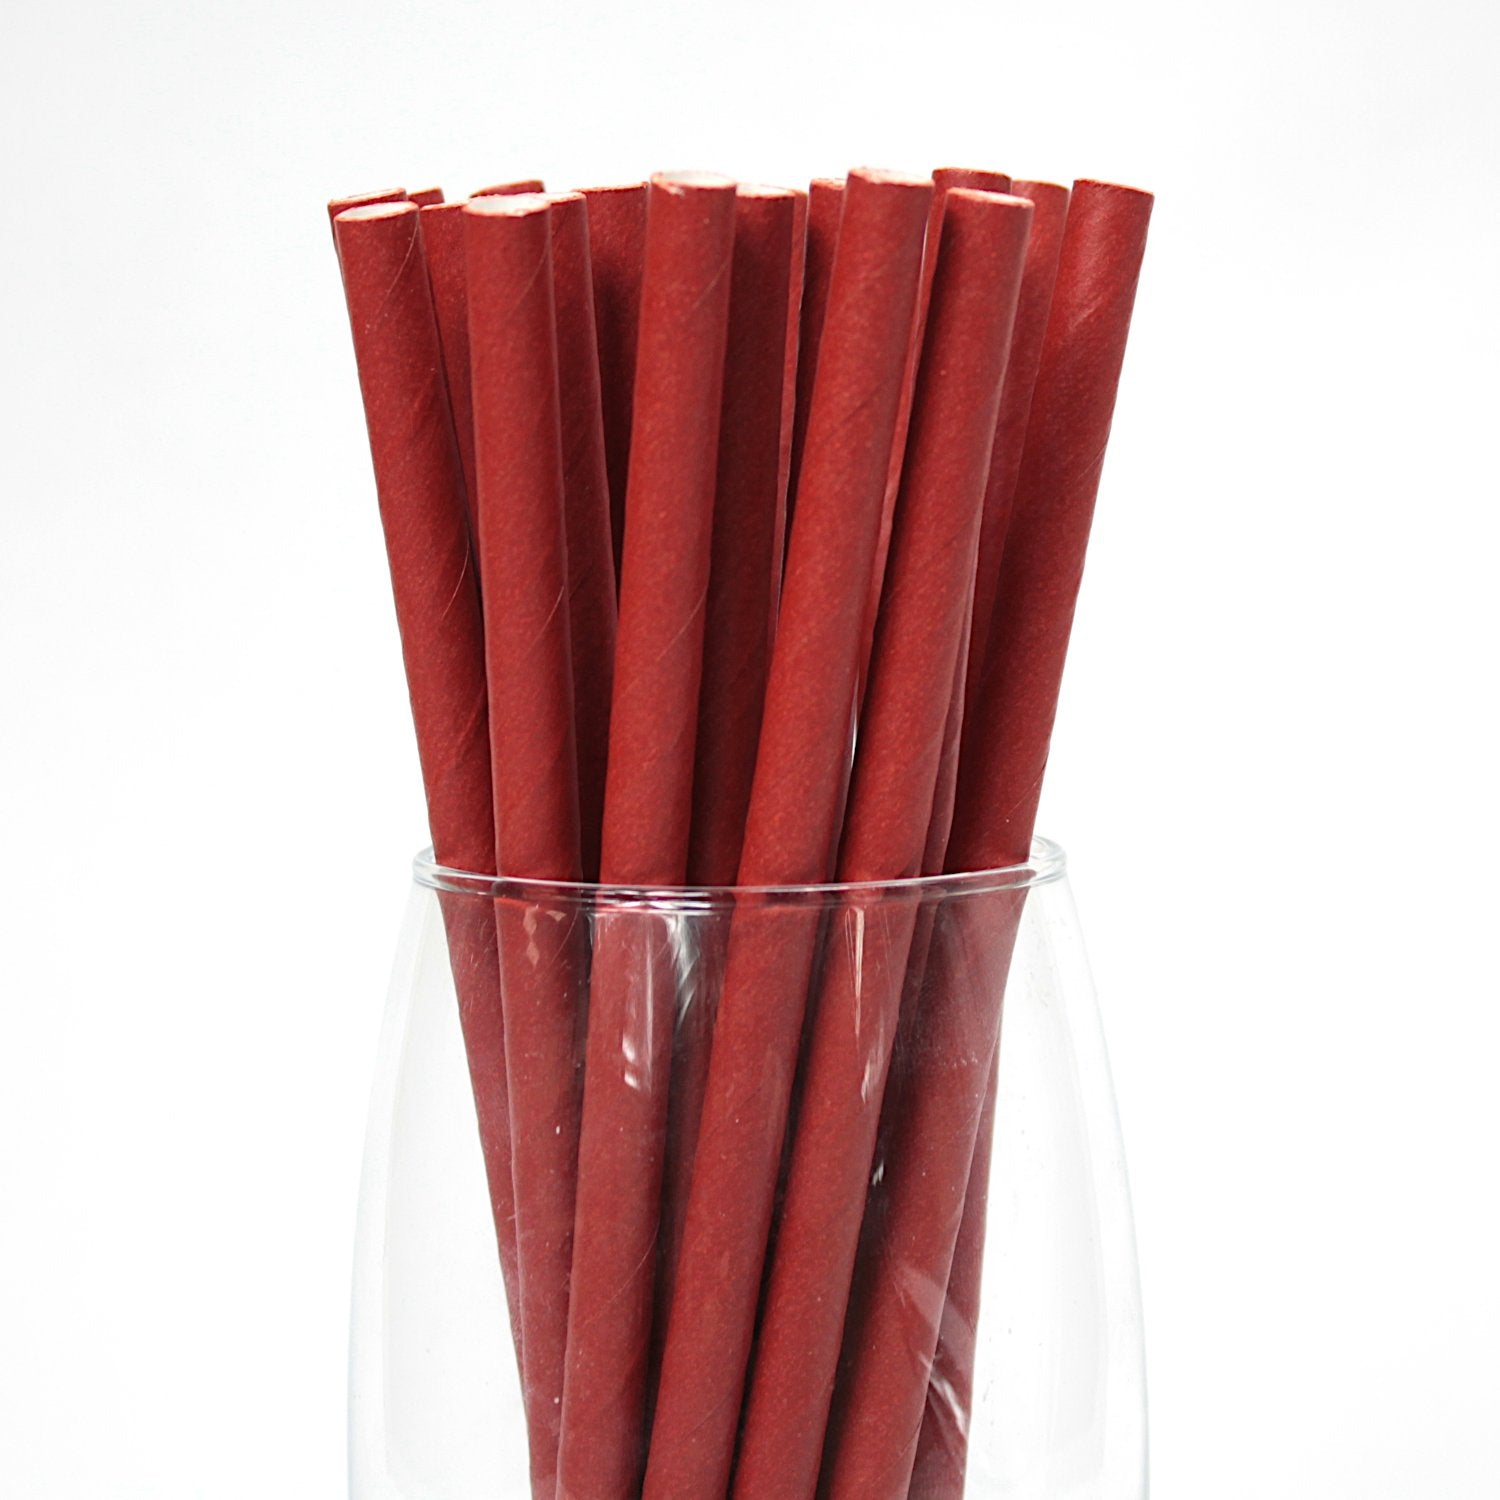 Red Paper Straws (8mm x 200mm) - Quality Drinking Straws for Smoothies and Milkshakes - Intrinsic Paper Straws